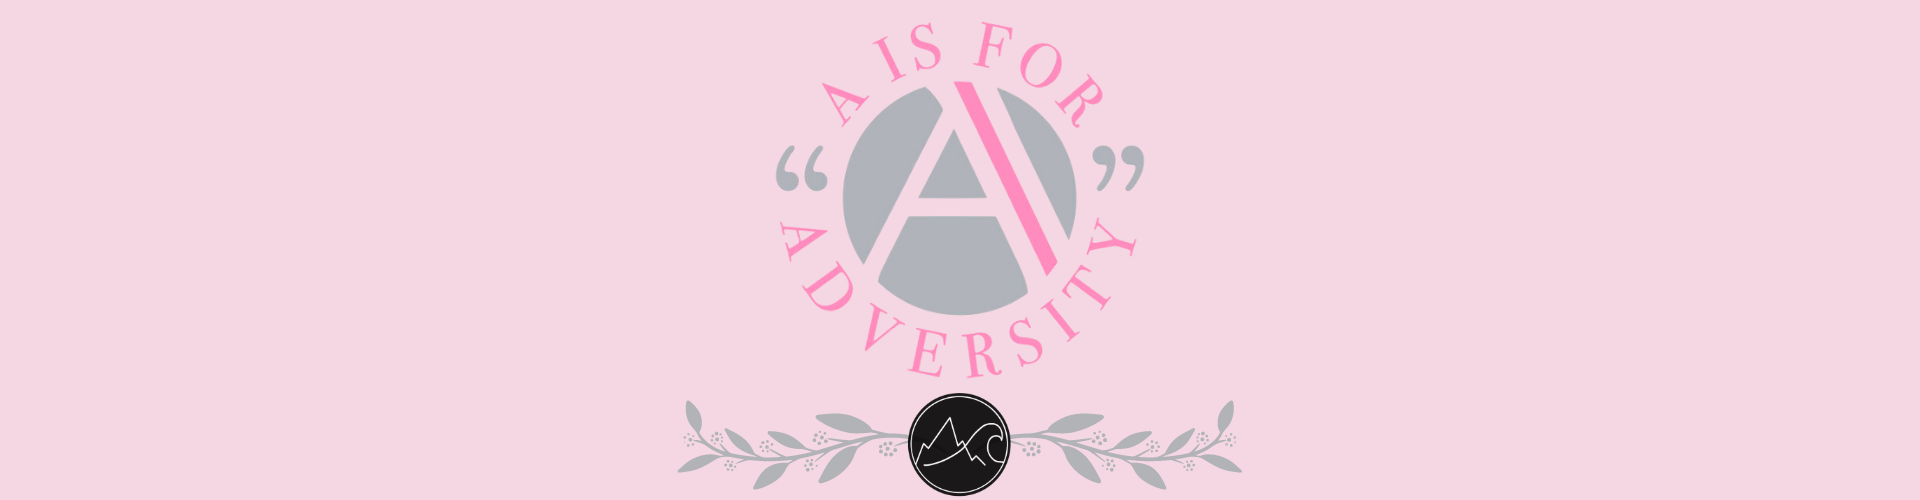 A is for Adversity